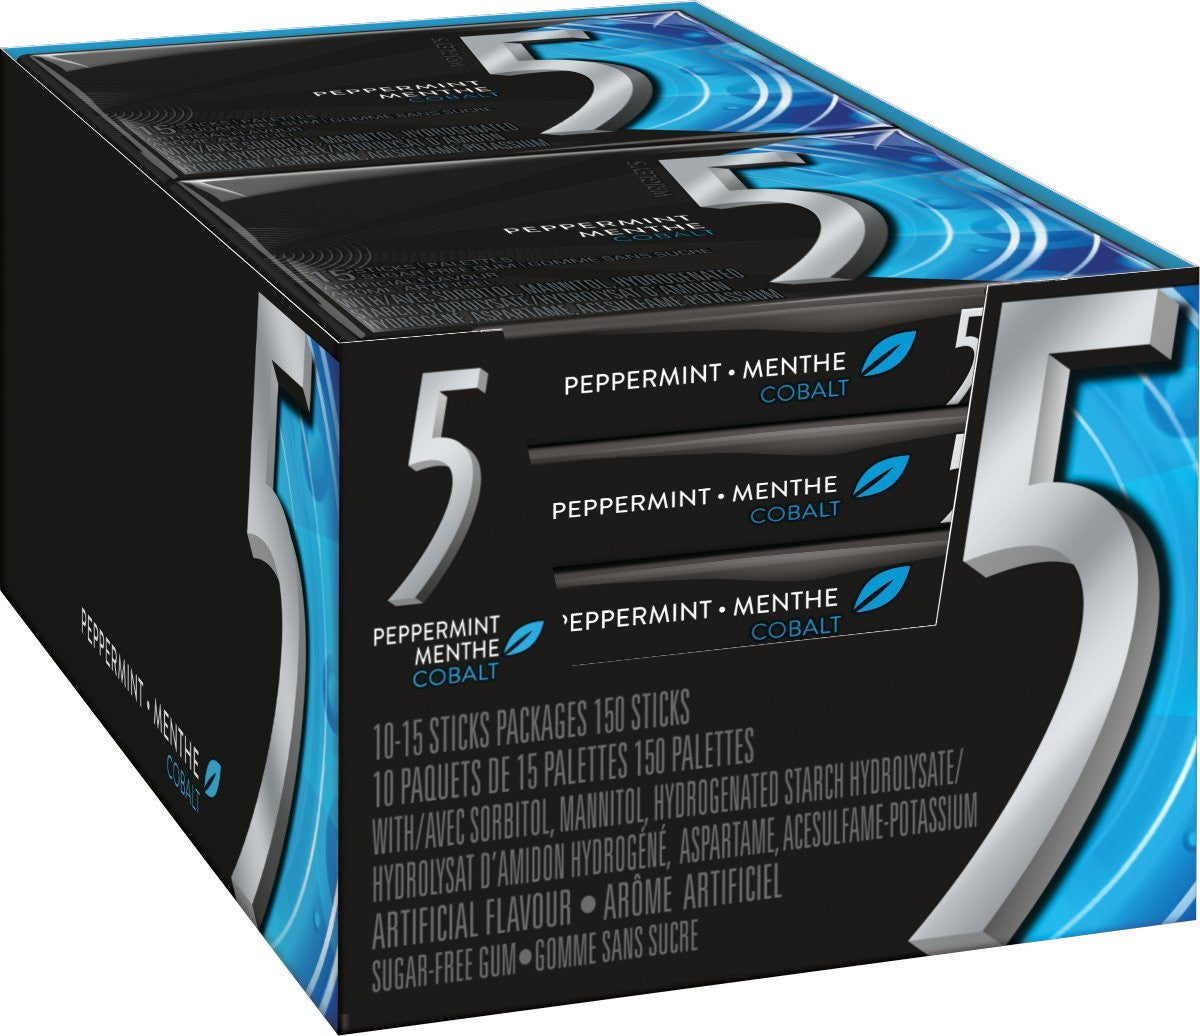 Wrigley 5 Cobalt-Cooling Peppermint Gum, 10ct/150 sticks total, (Imported from Canada)